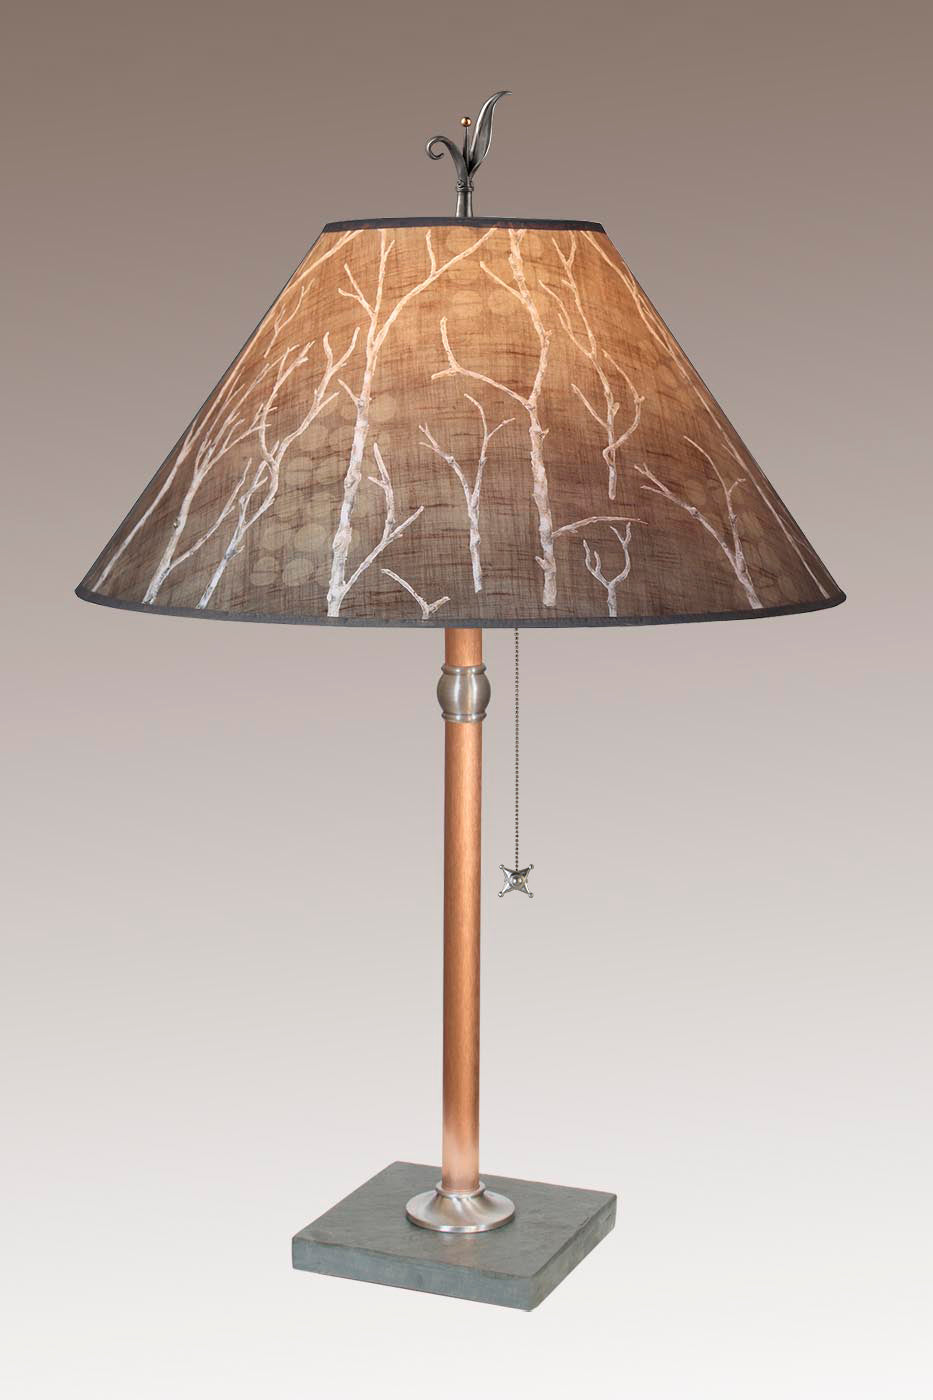 Copper Table Lamp with Large Conical Shade in Twigs